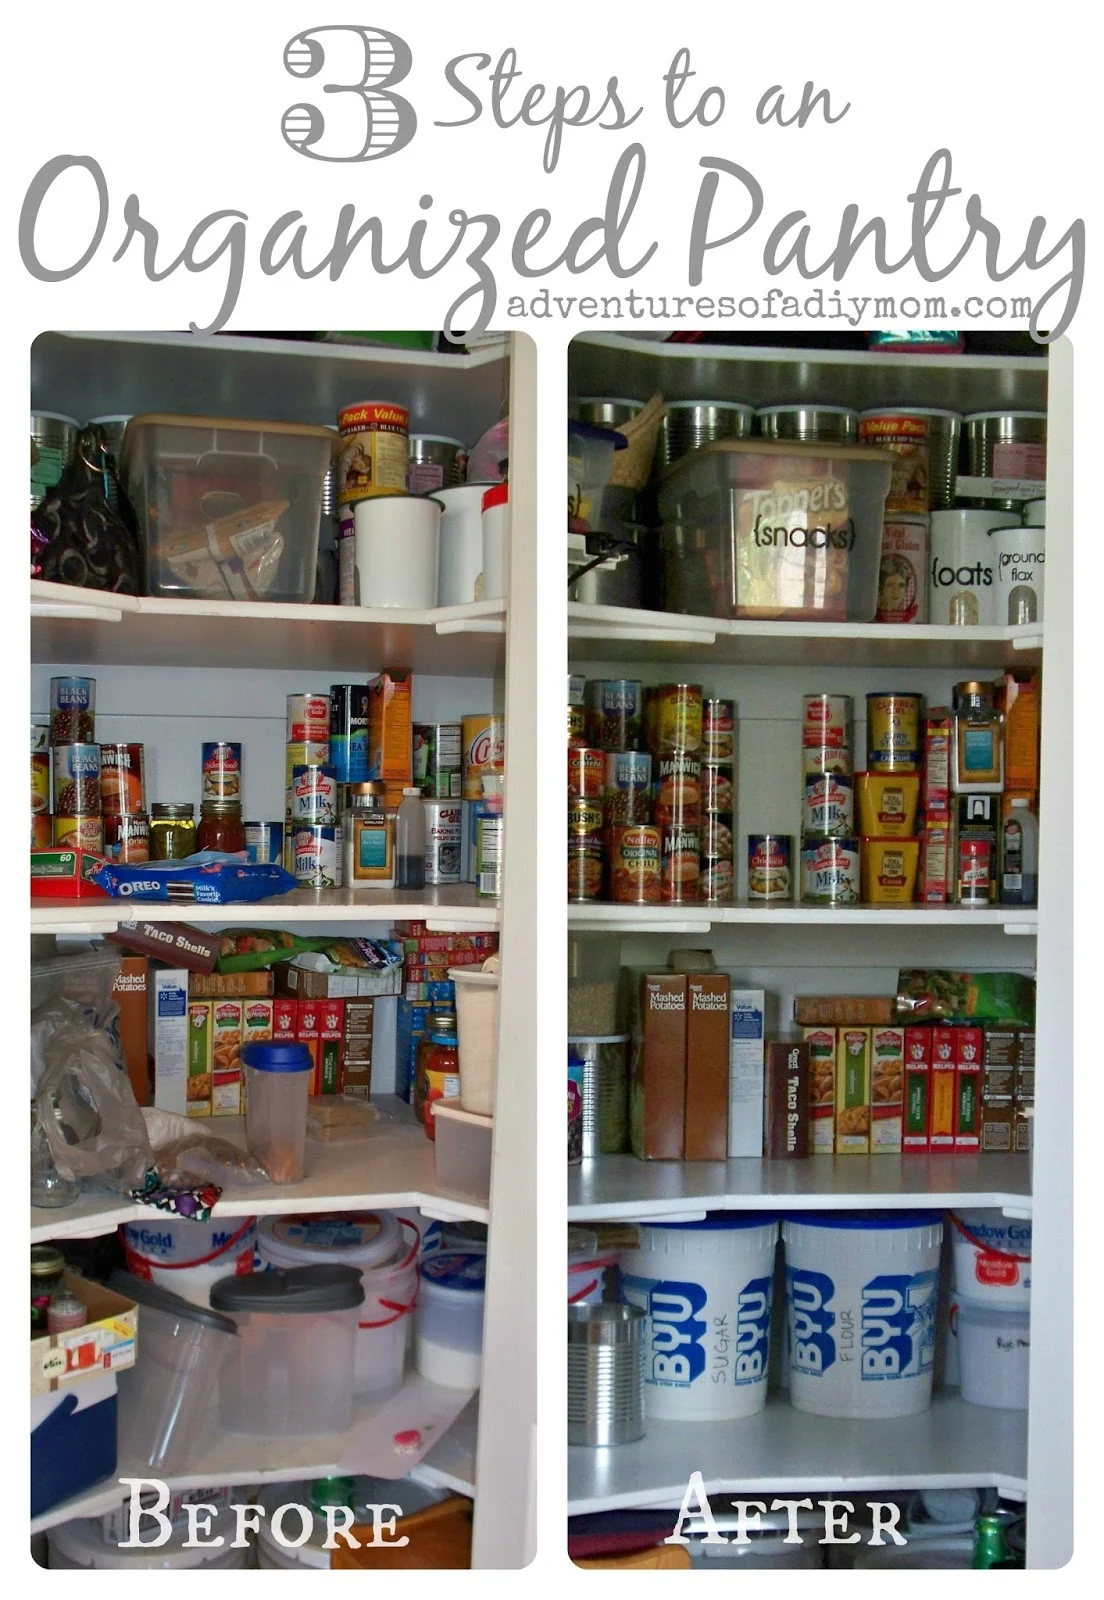 3 Steps to an Organized Pantry